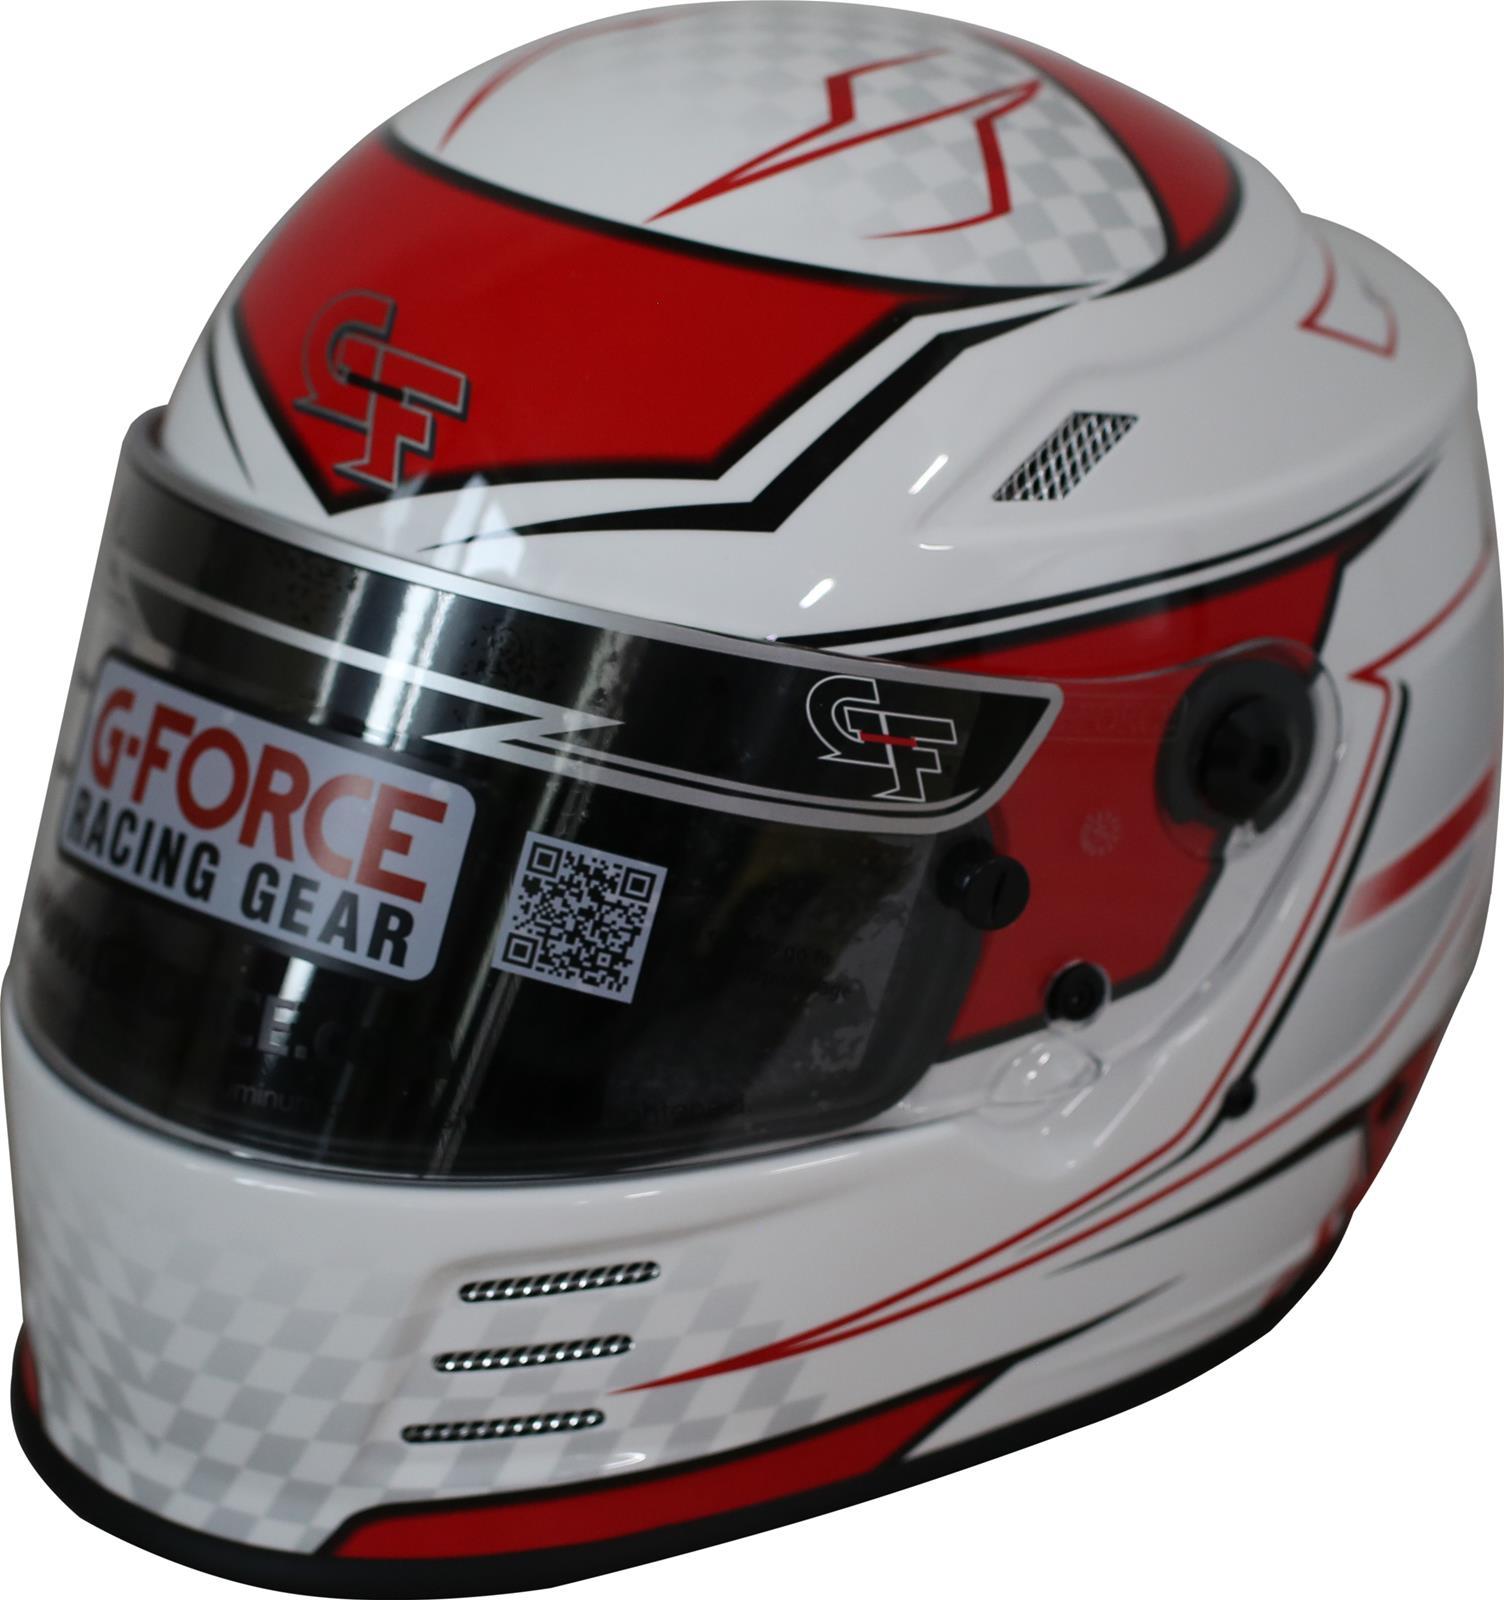 G-Force HELMET REVO GRAPHICS XLG RED SA2020 Helmets and Accessories Helmets main image